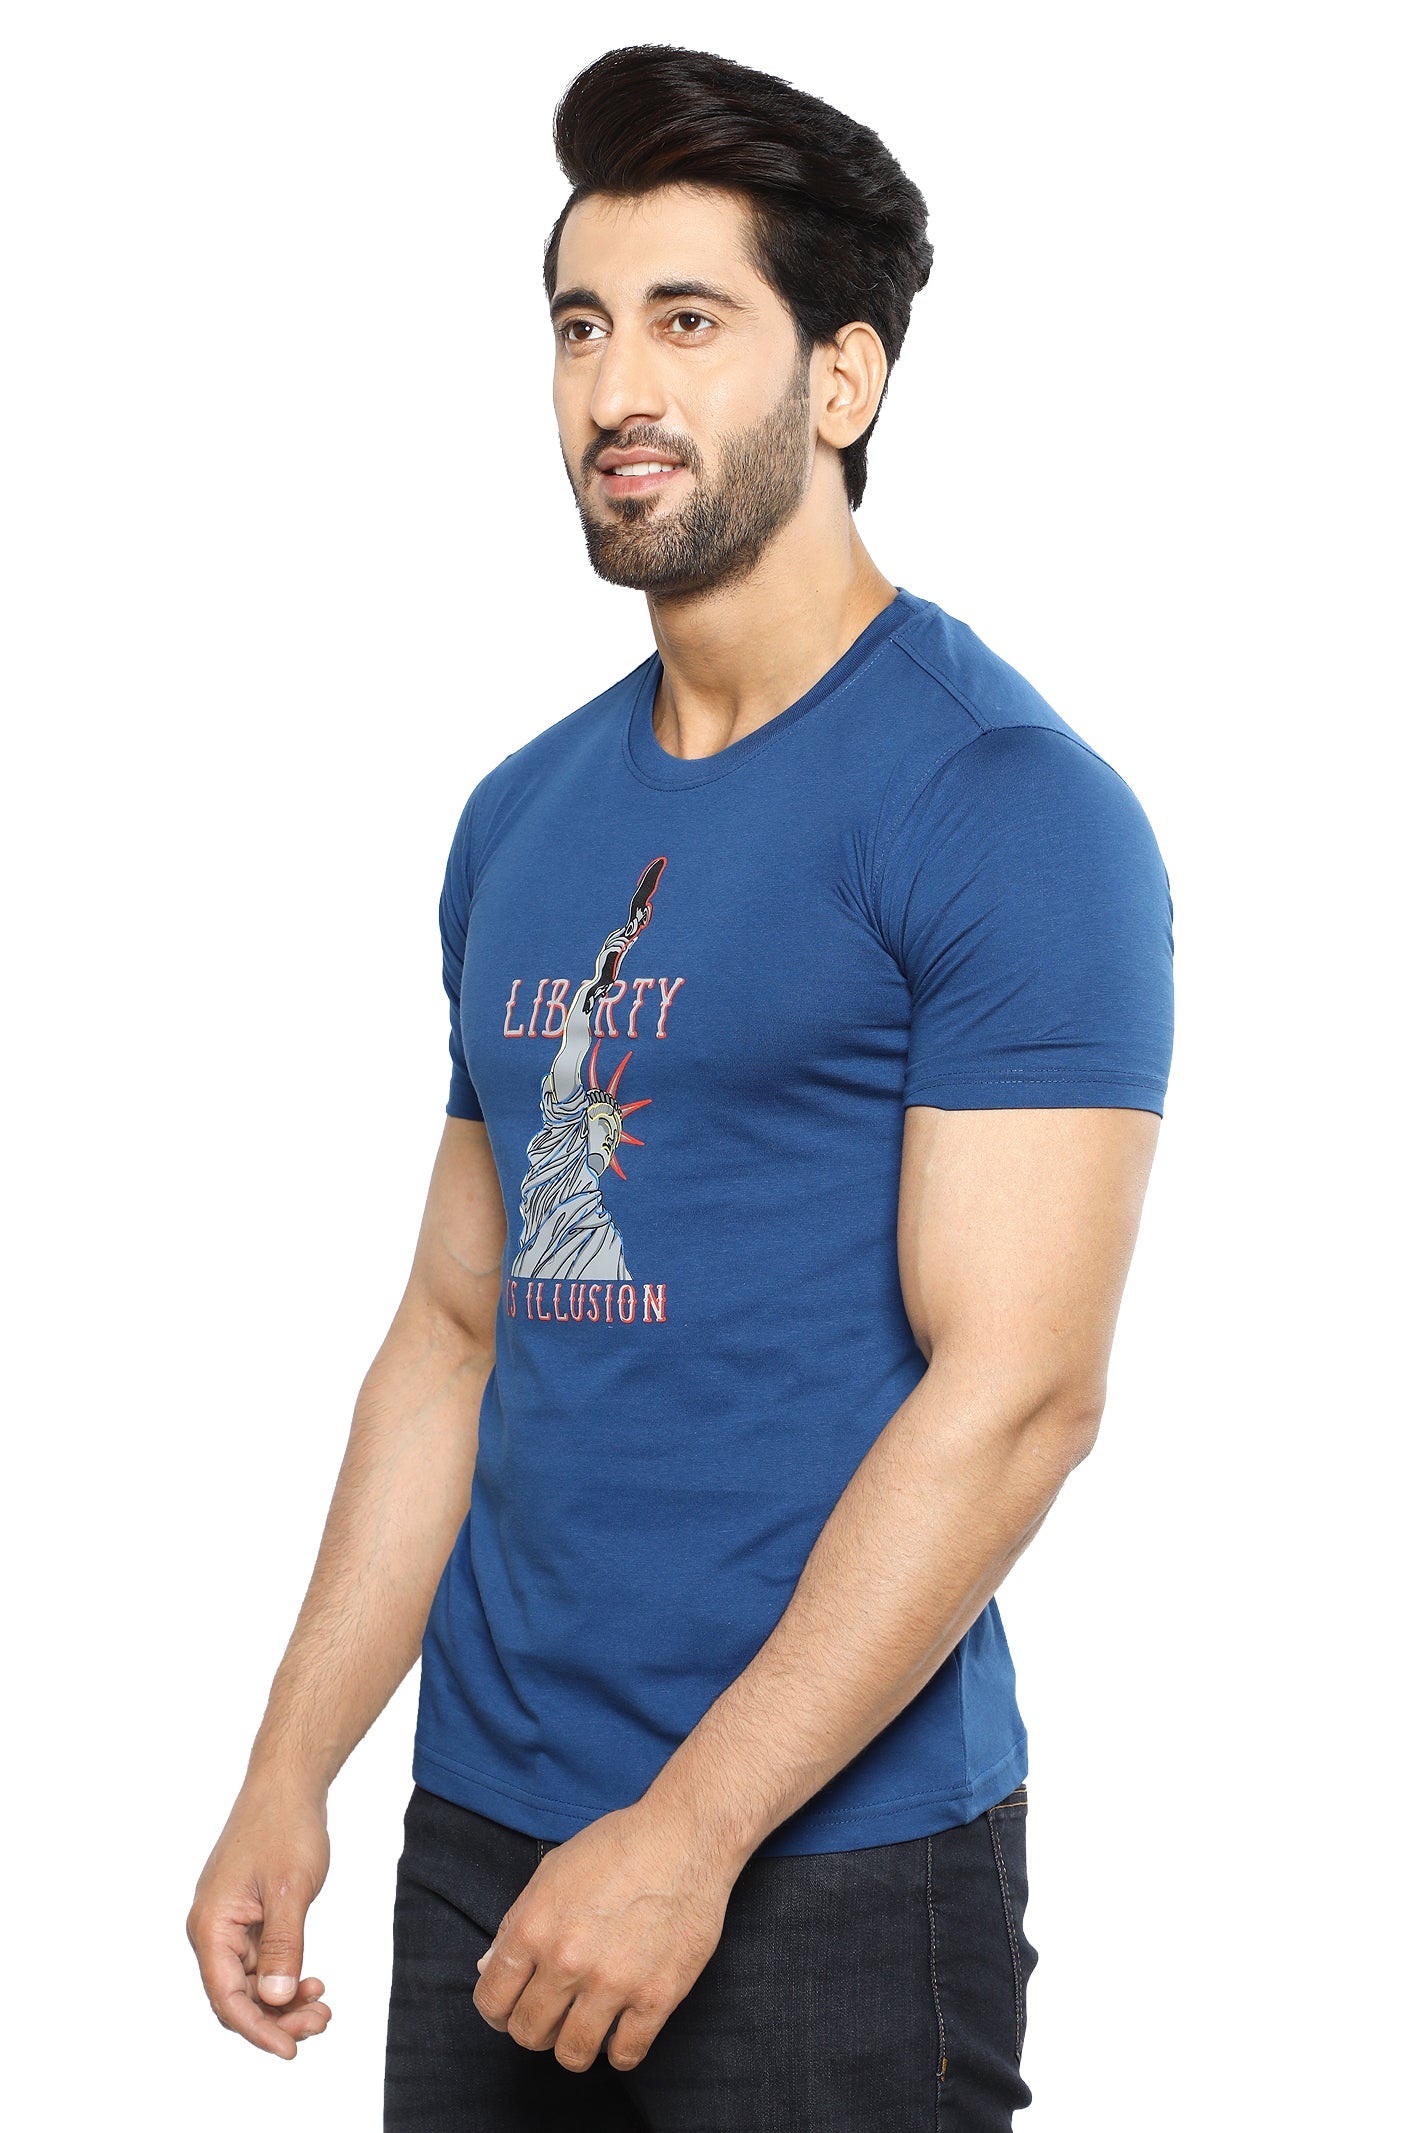 Diners Men's Round Neck T-Shirt SKU: NA804-N-BLUE - Diners